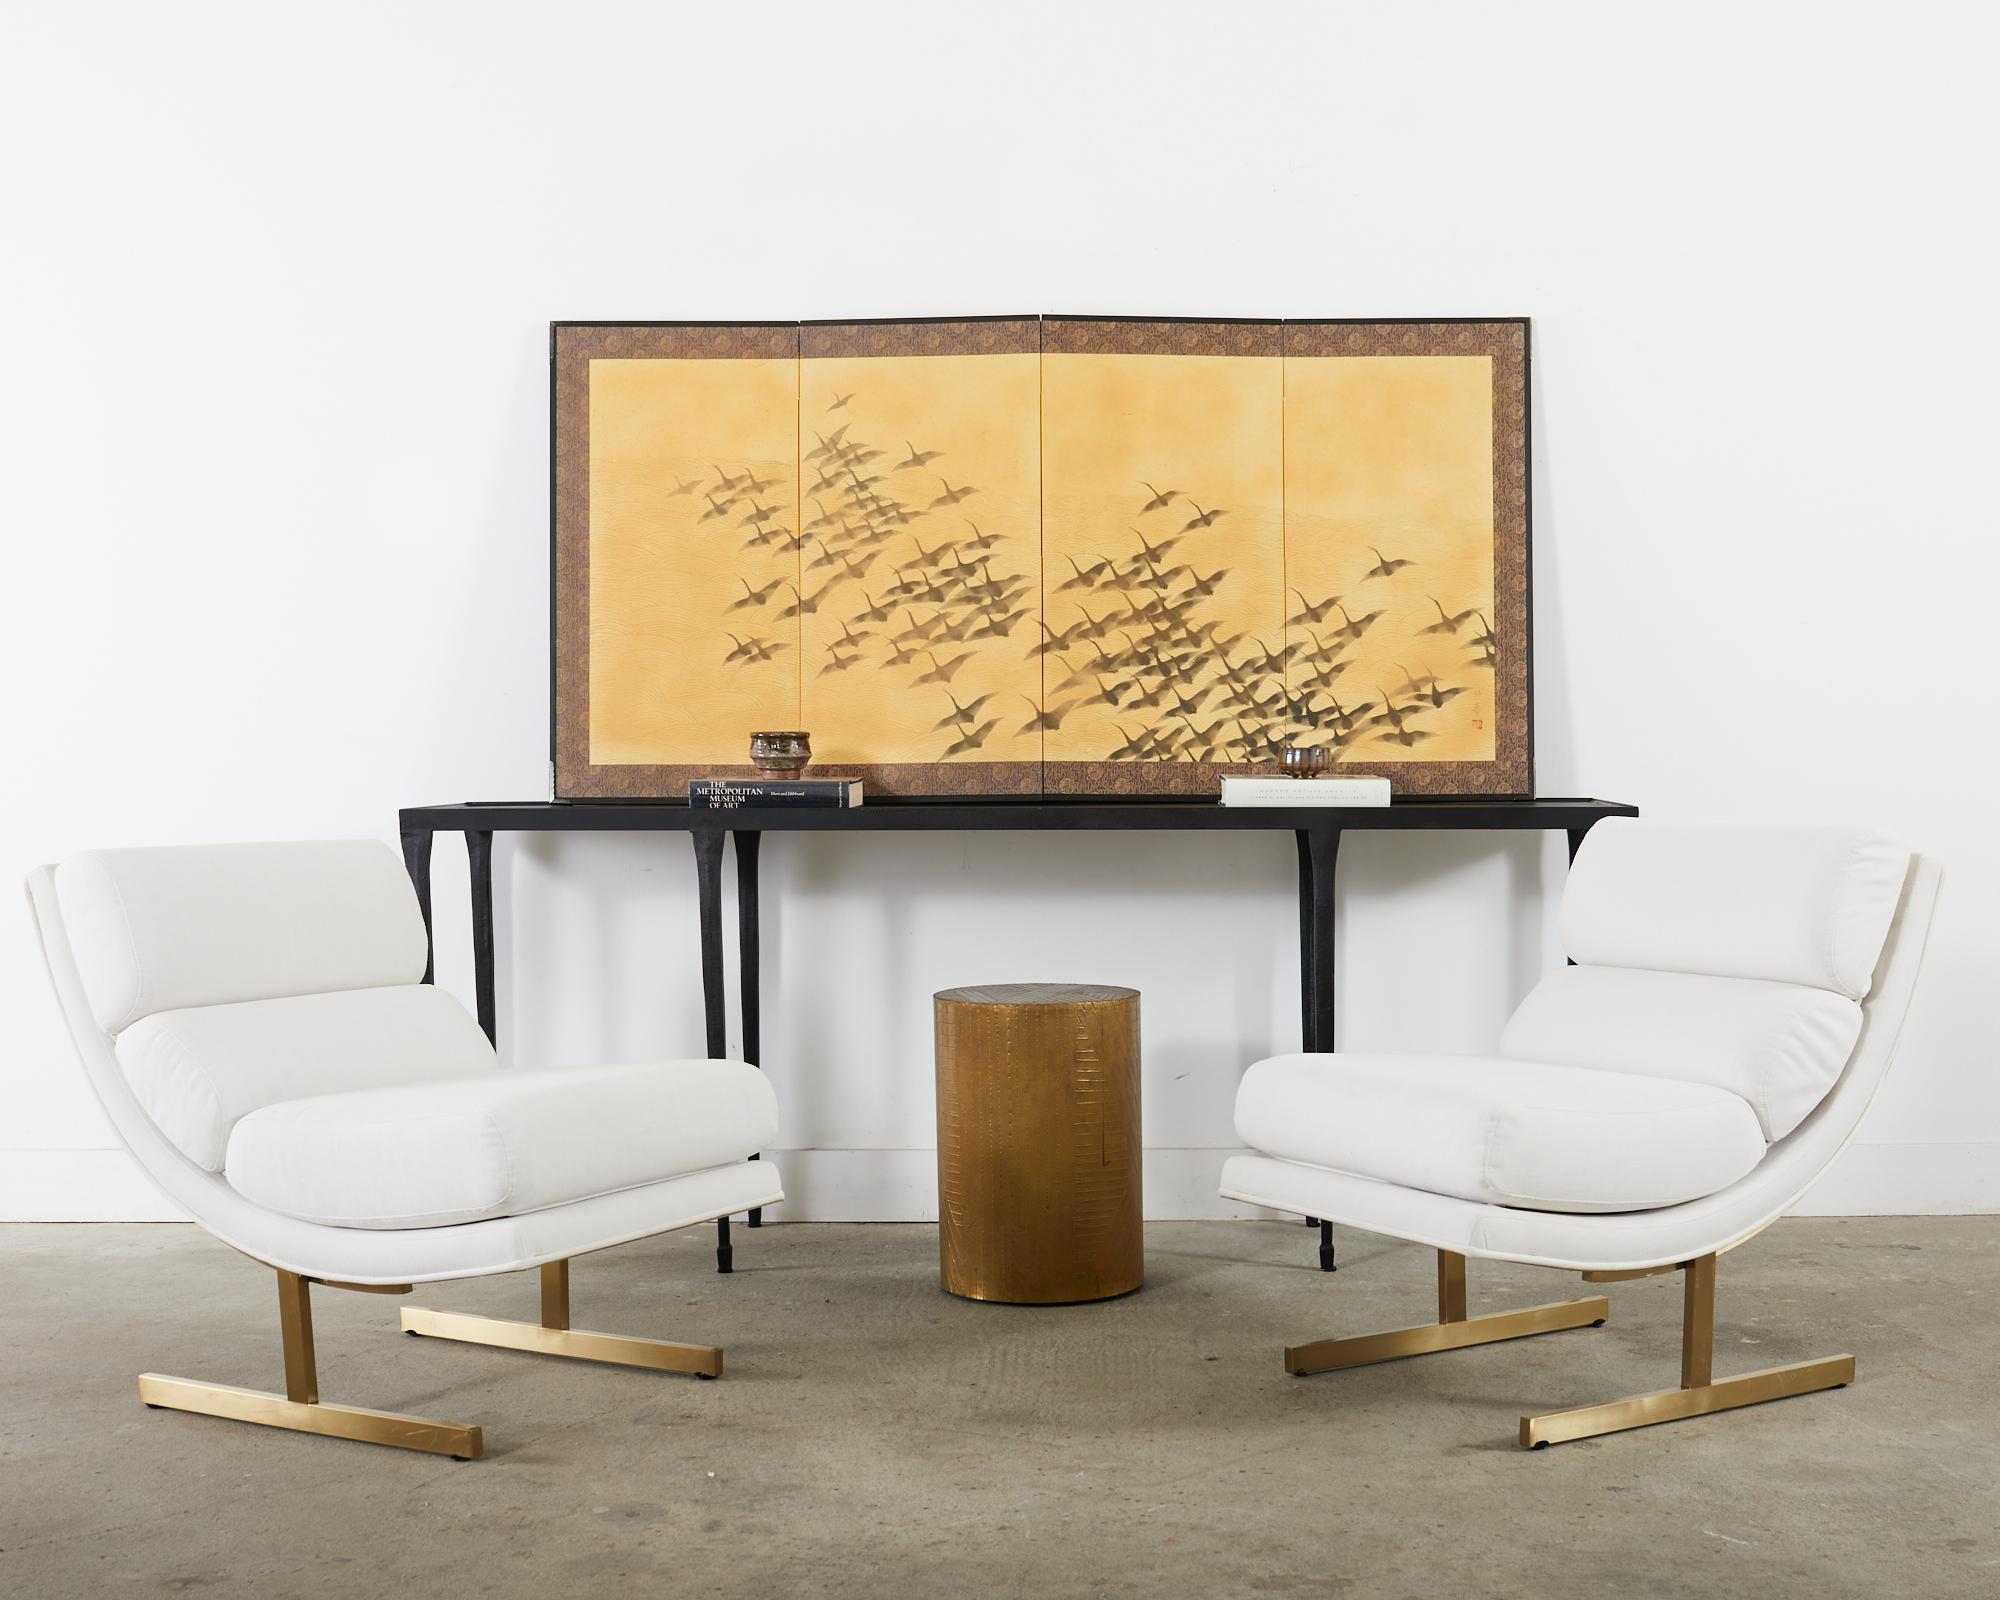 Impressive modern style Japanese Showa period four panel byobu screen depicting a flock of wild geese in flight over a stylized background. Delicate ink pigments over hand-crafted mulberry paper in a golden color. The screen is set in a wood frame